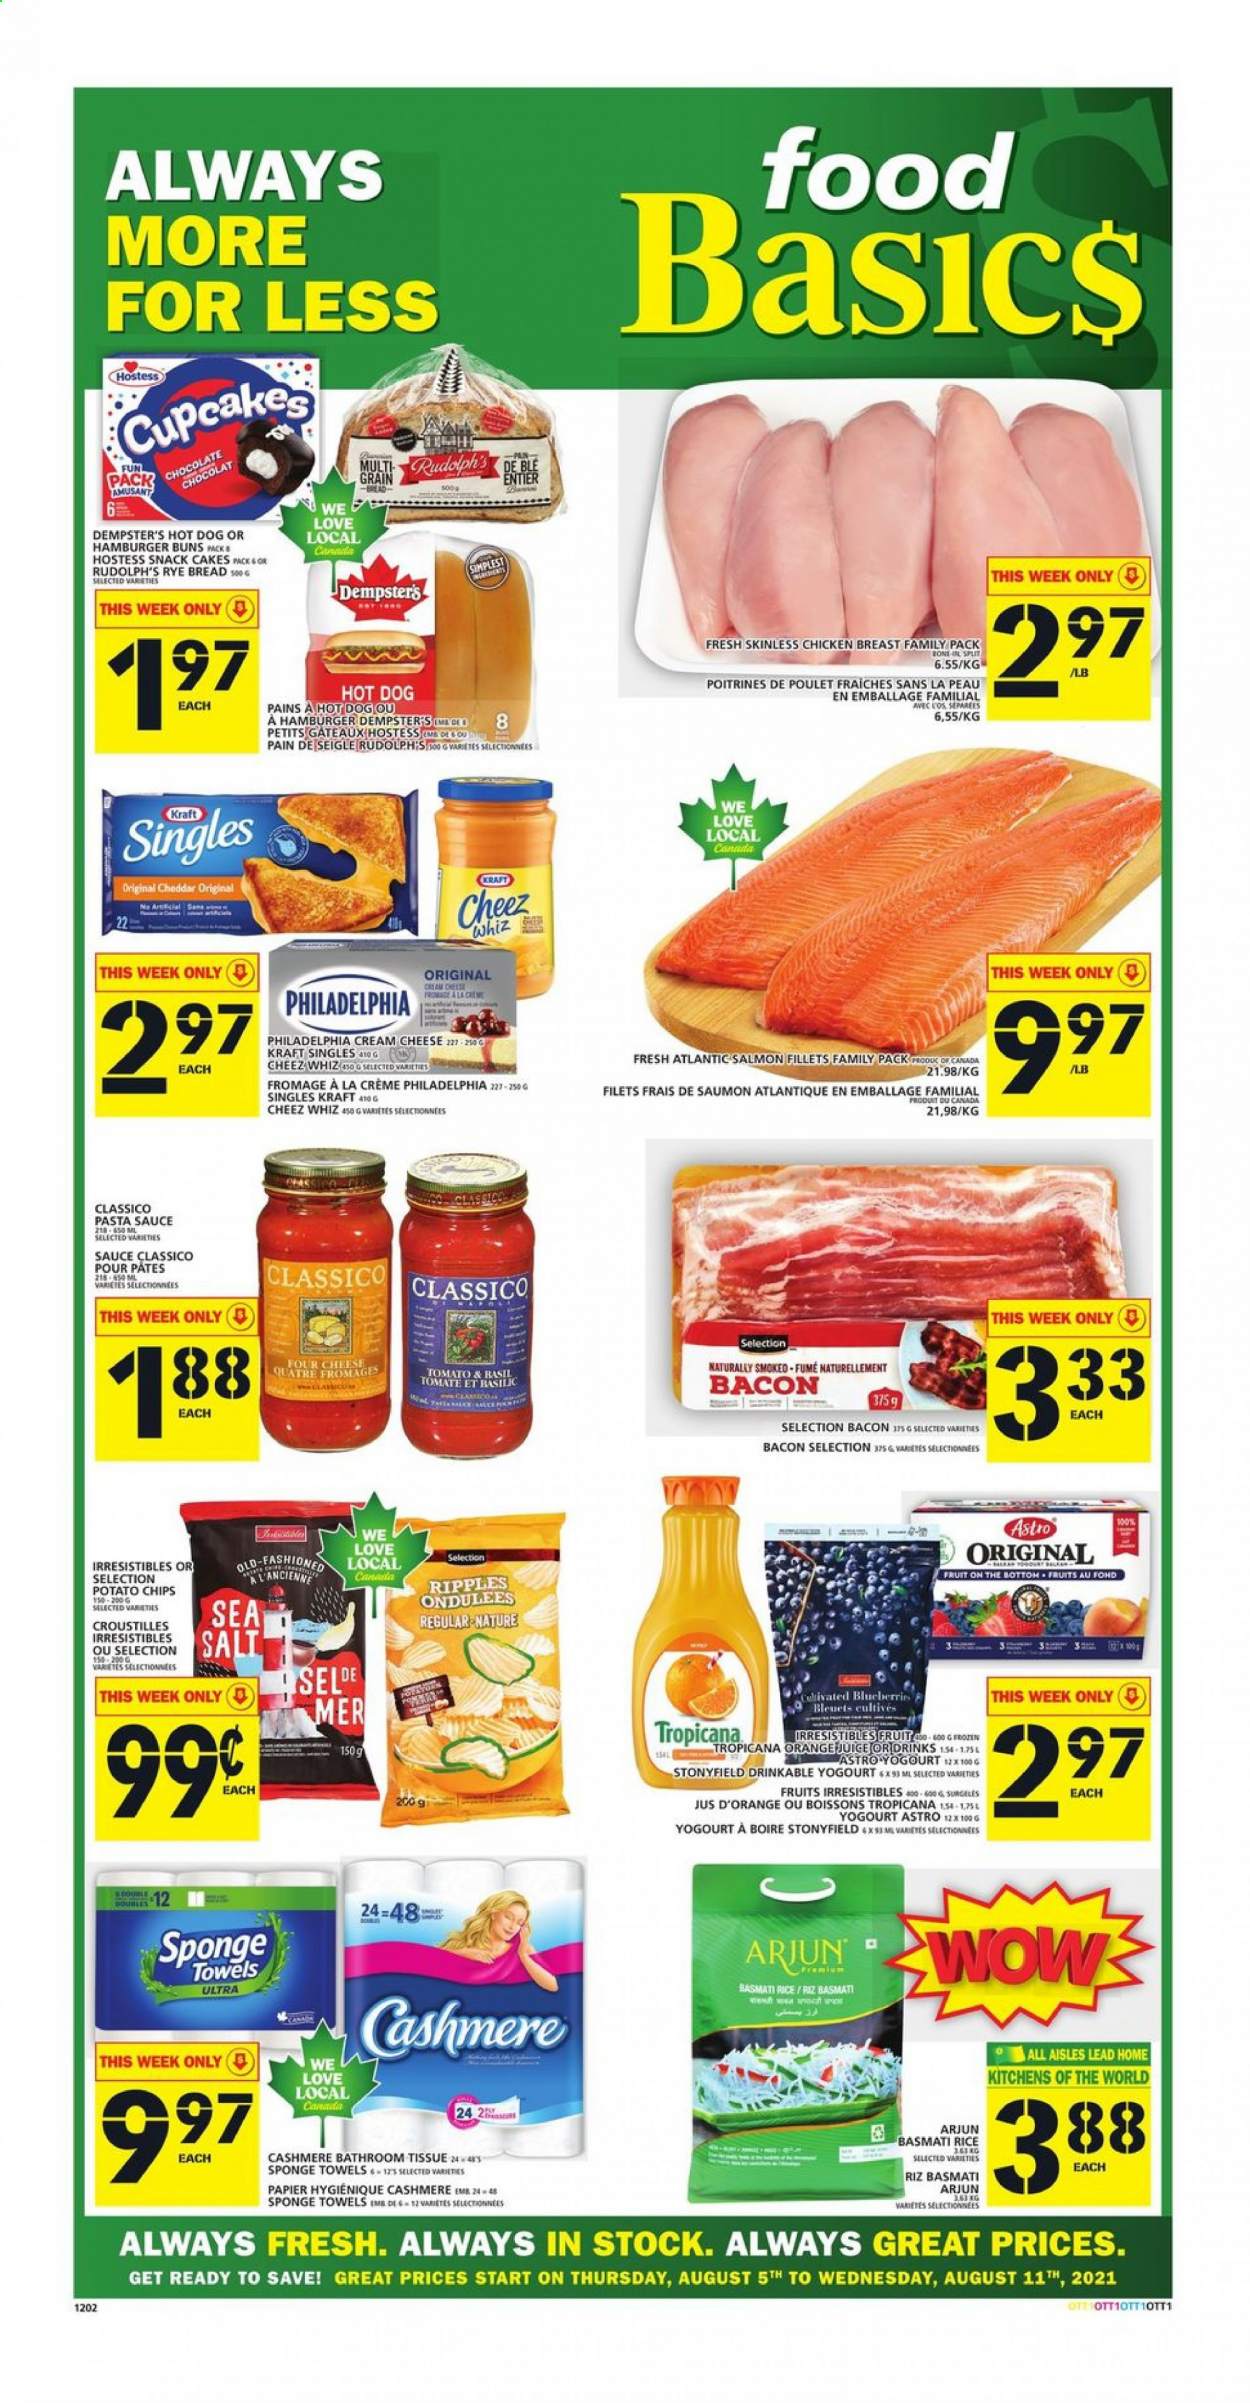 thumbnail - Food Basics Flyer - August 05, 2021 - August 11, 2021 - Sales products - bread, cake, buns, burger buns, cupcake, salmon, salmon fillet, hot dog, pasta sauce, sauce, Kraft®, bacon, cream cheese, sandwich slices, cheese, Kraft Singles, snack, potato chips, basmati rice, rice, Classico, chicken breasts, chicken, bath tissue, sponge, towel. Page 1.